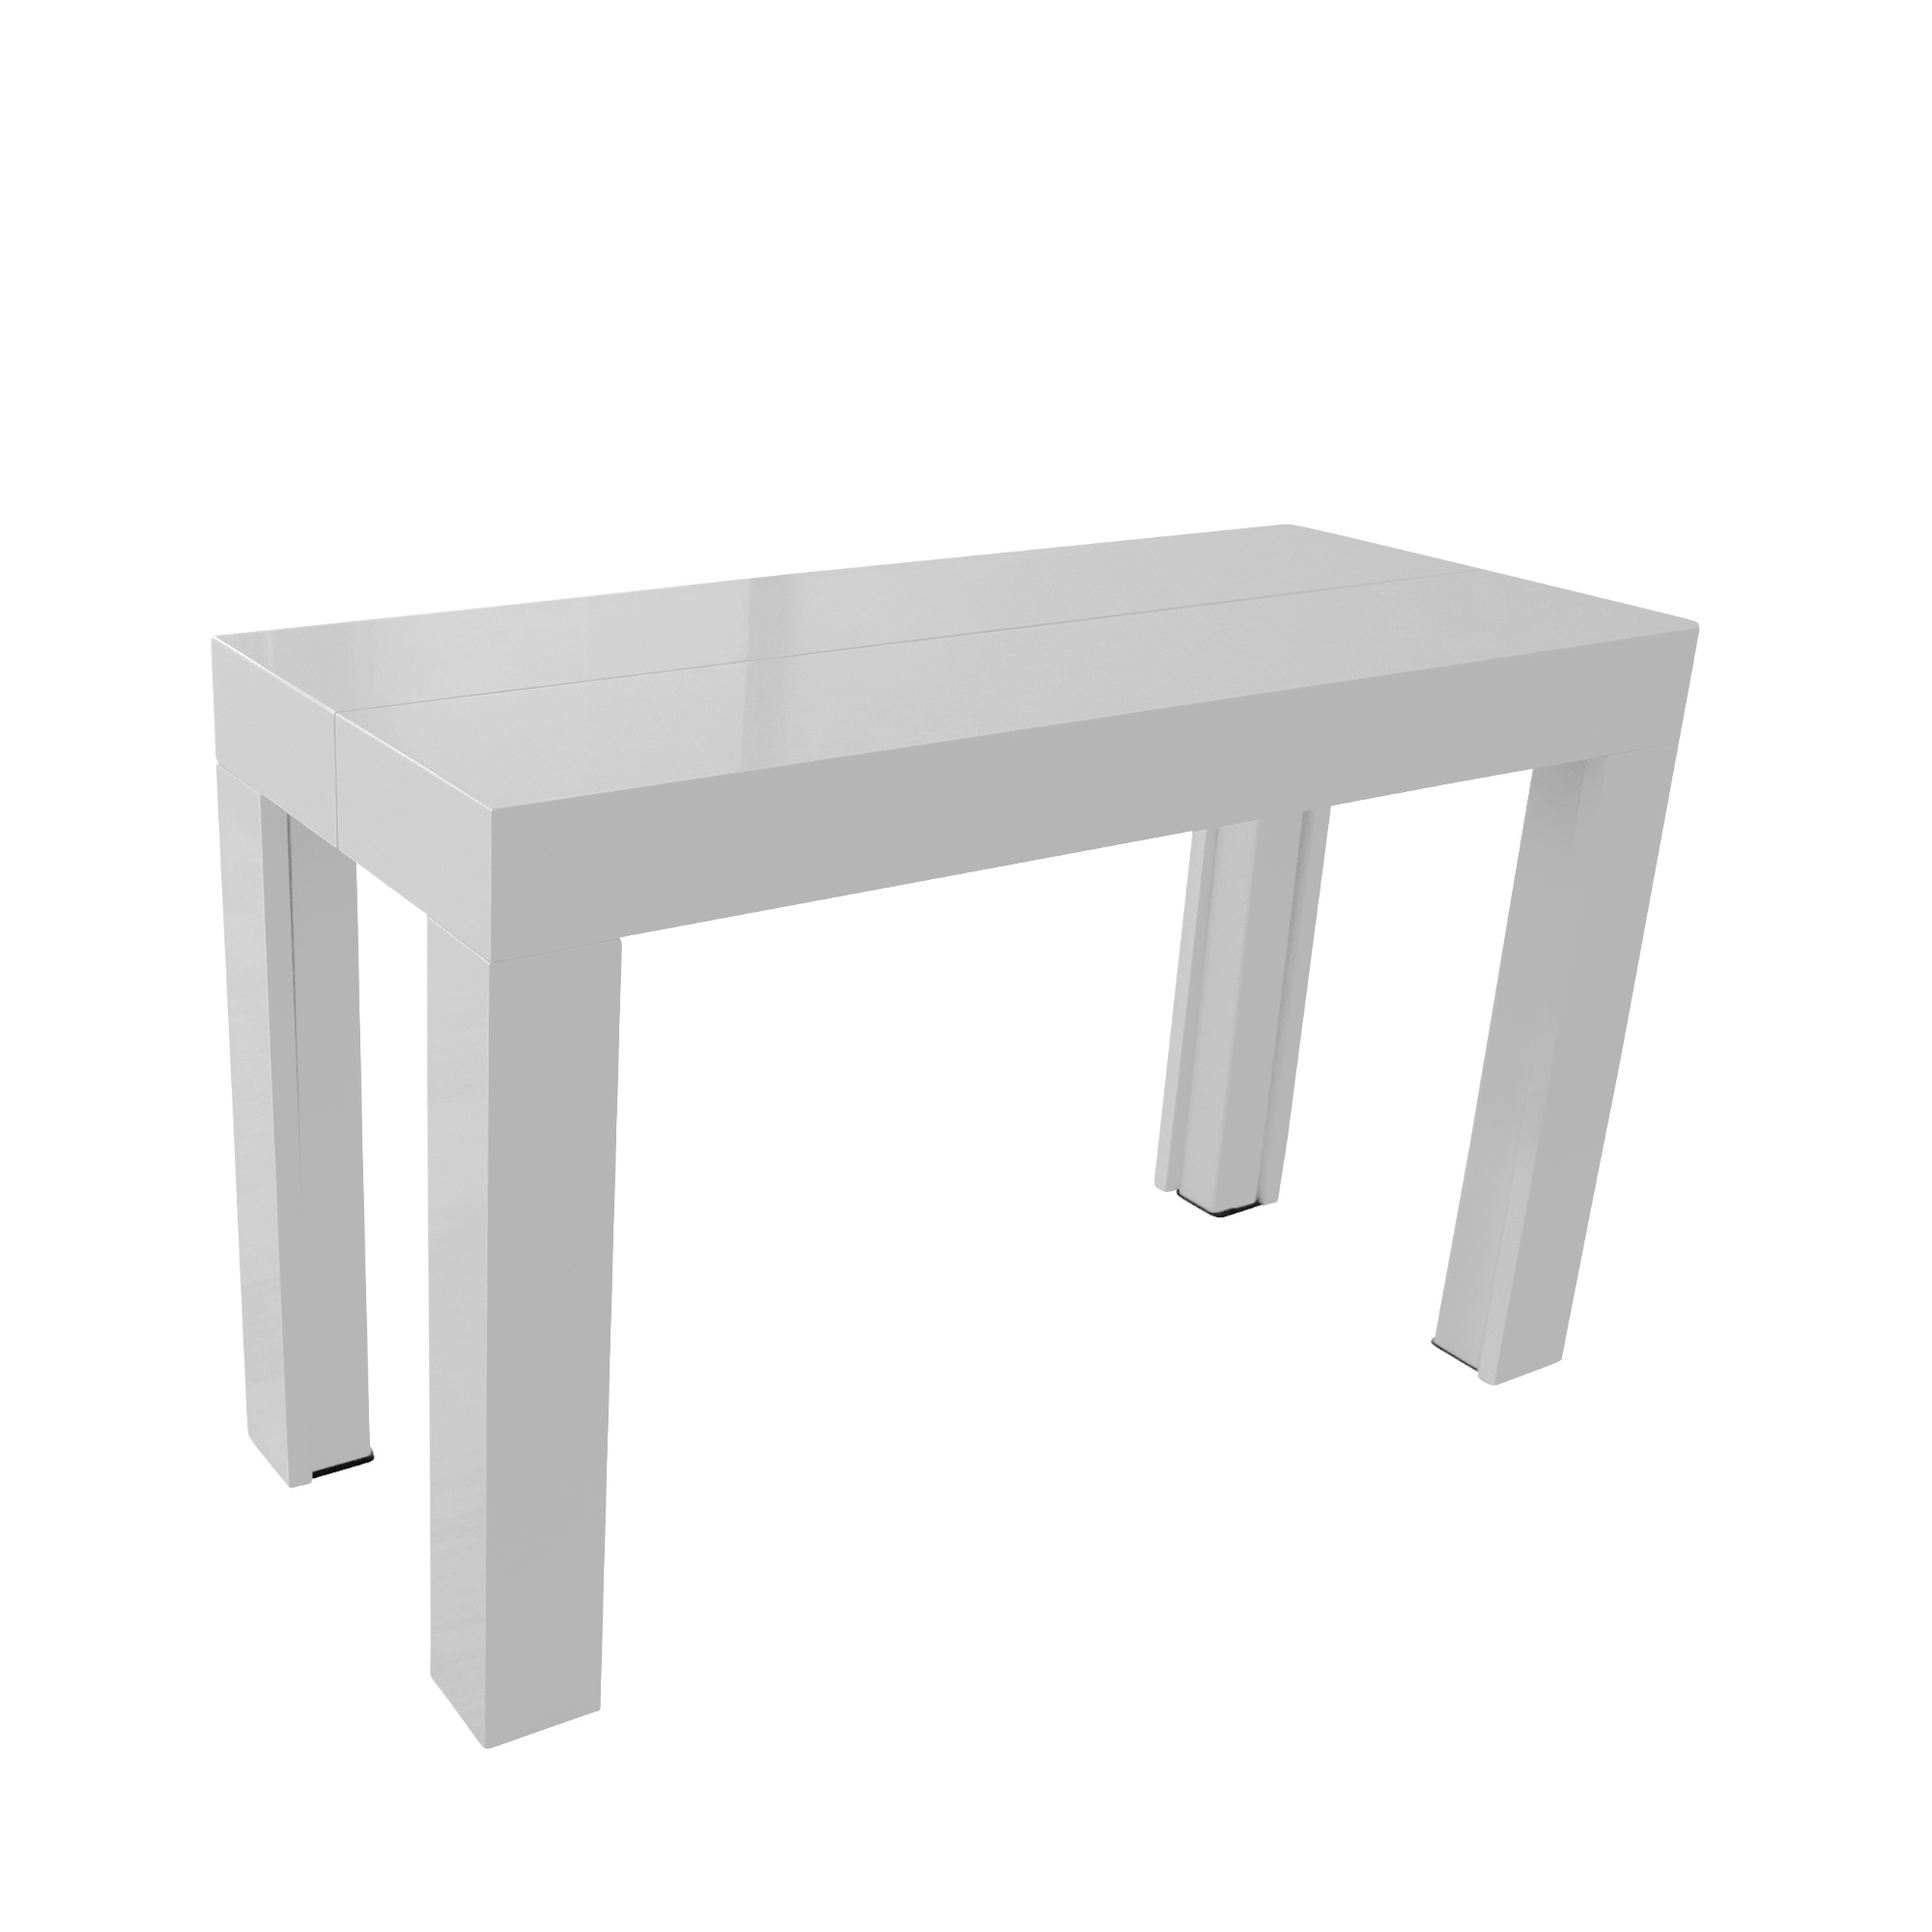 https://expandfurniture.com/wp-content/uploads/2014/06/White-Tiny-Titan-Transformer-Table-extends-to-seat-12-and-makes-6-different-sized-tables.jpg